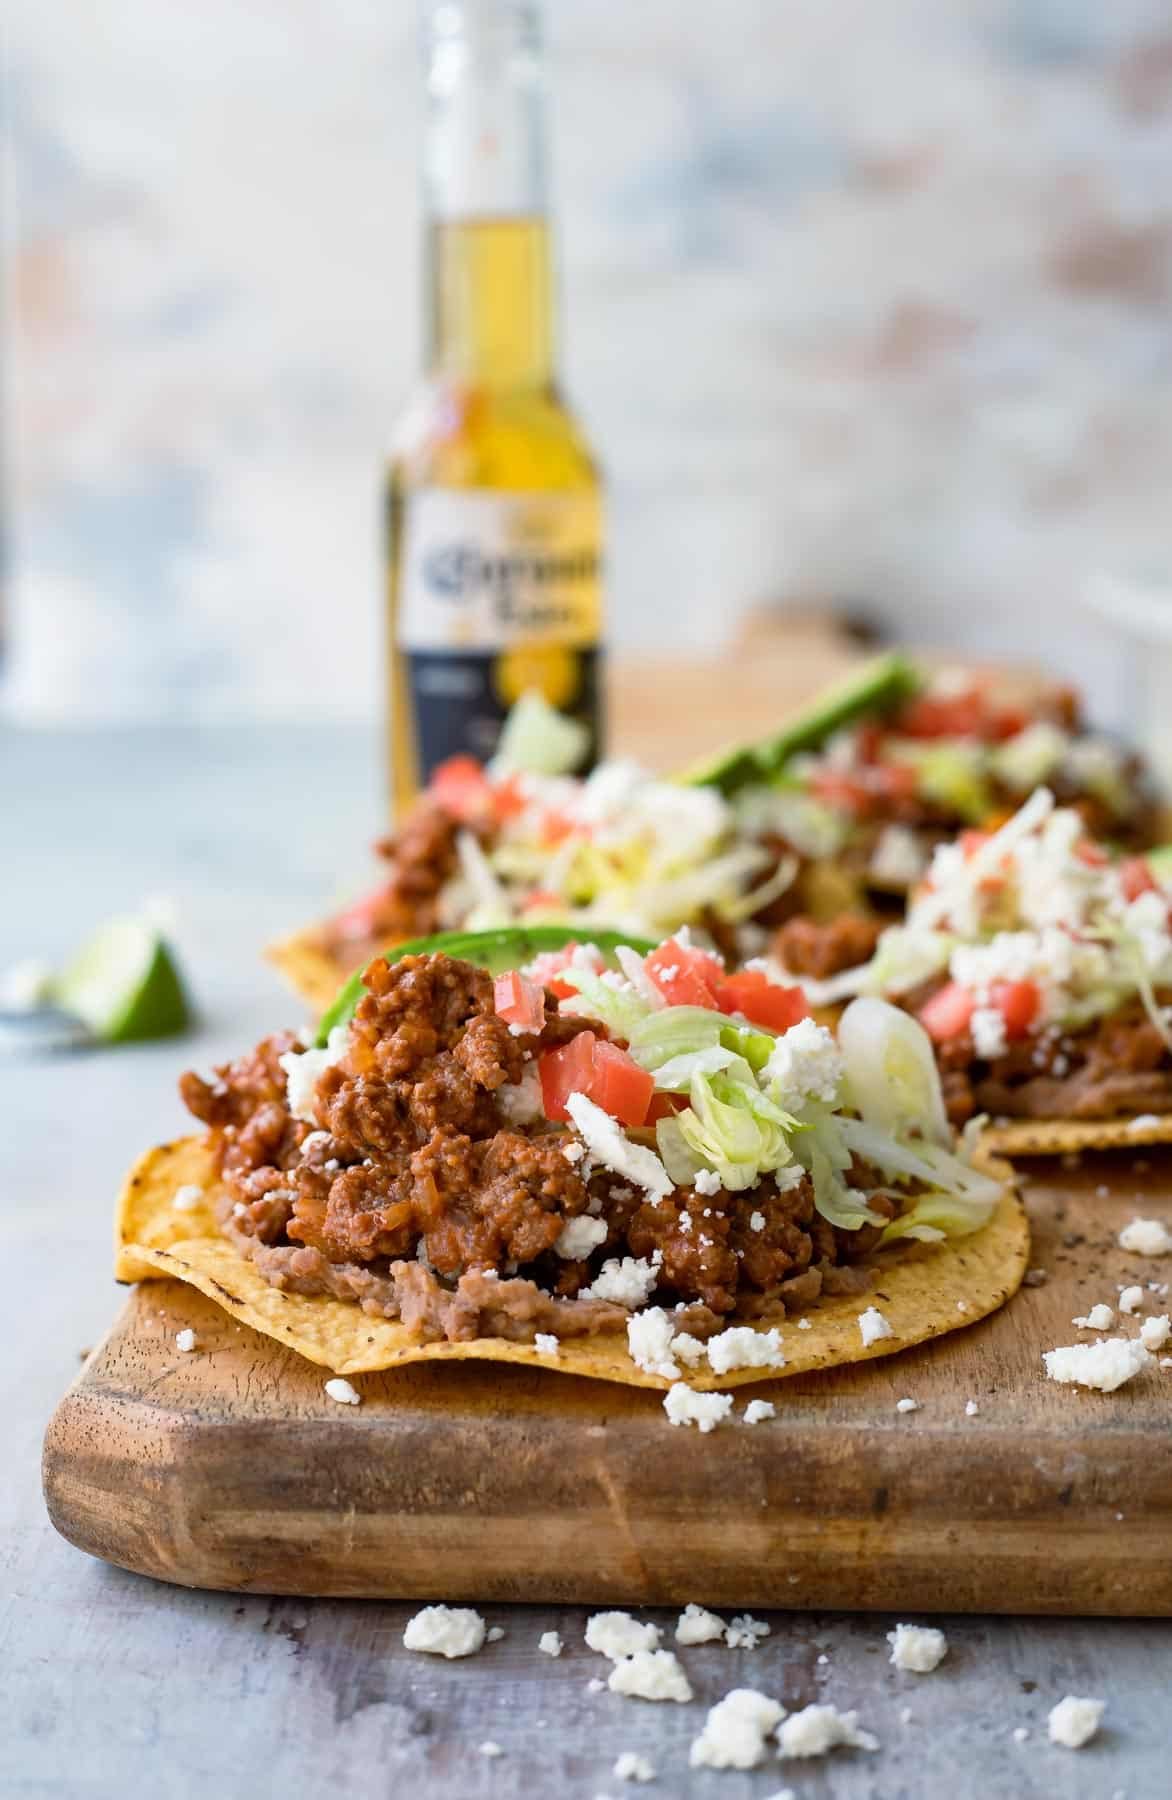 Tostadas on a board next to a bottle of beer.